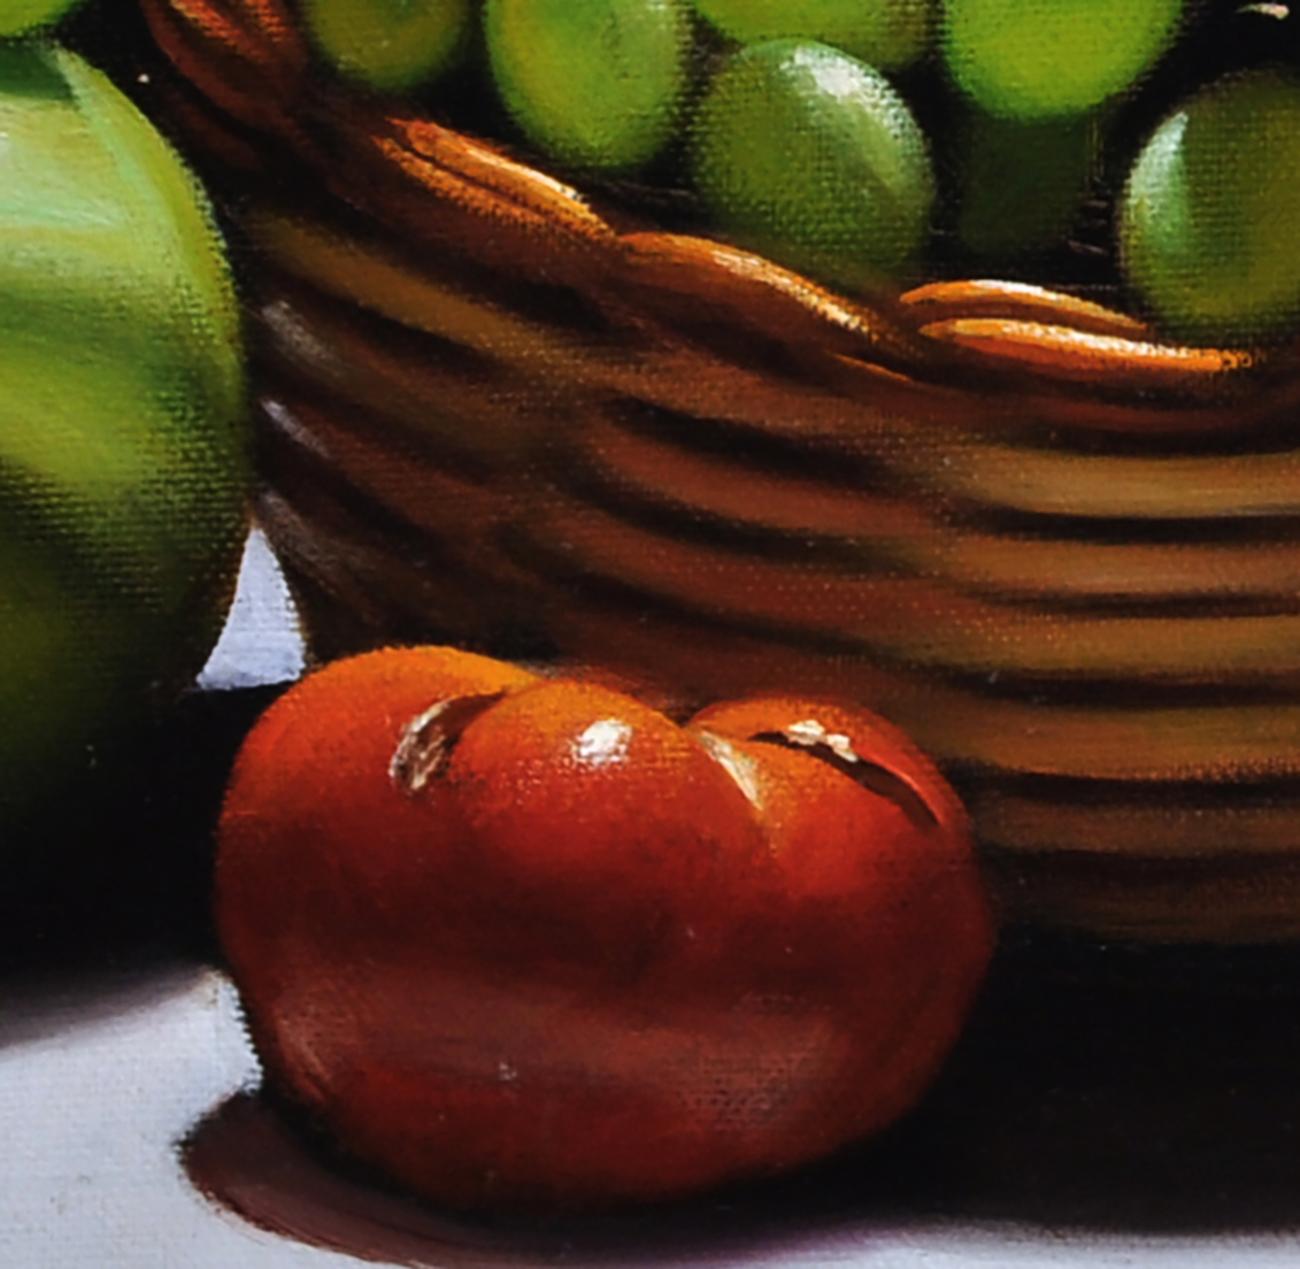 Basket With Fruit - Hyperrealism - Oil On Canvas Italian Still Life Painting  - Black Still-Life Painting by Maximilian Ciccone